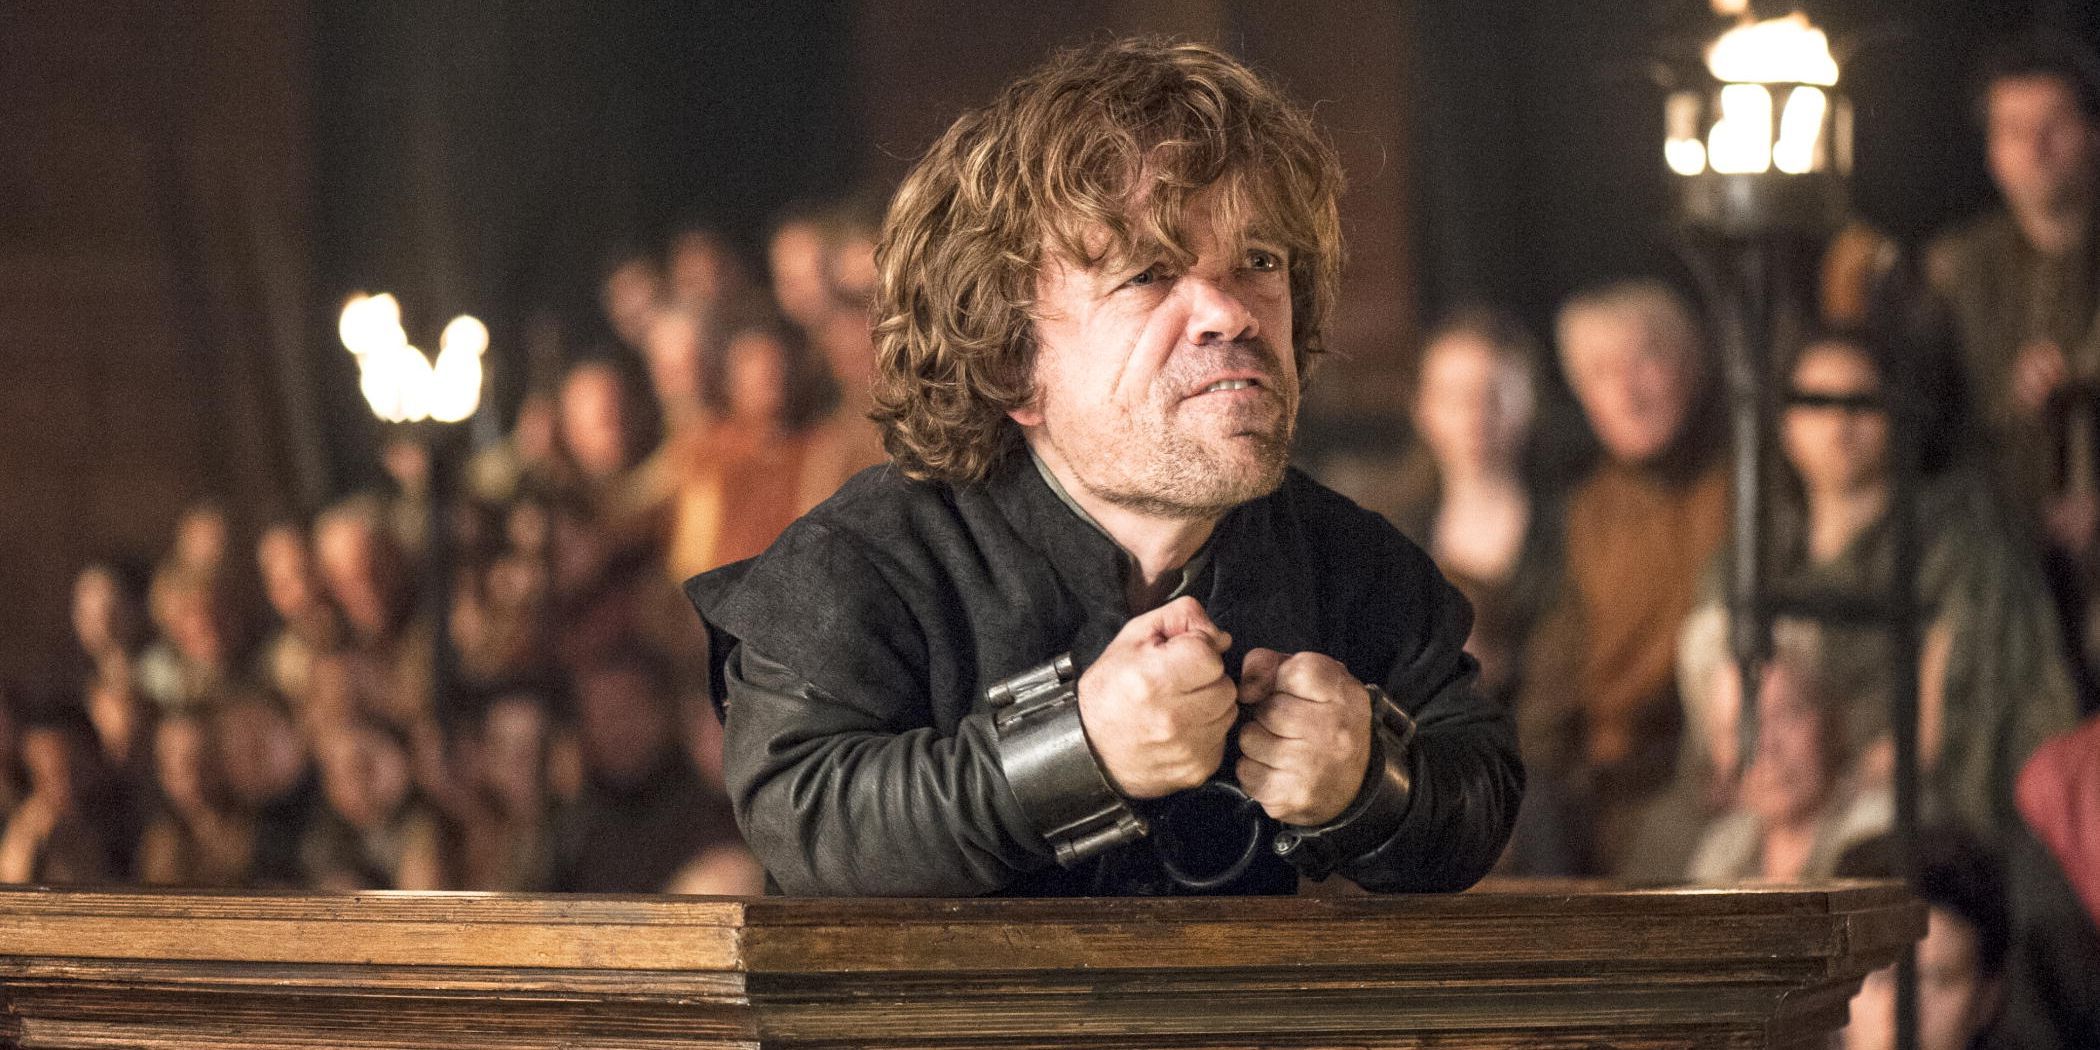 Tyrion demands a trial by combat